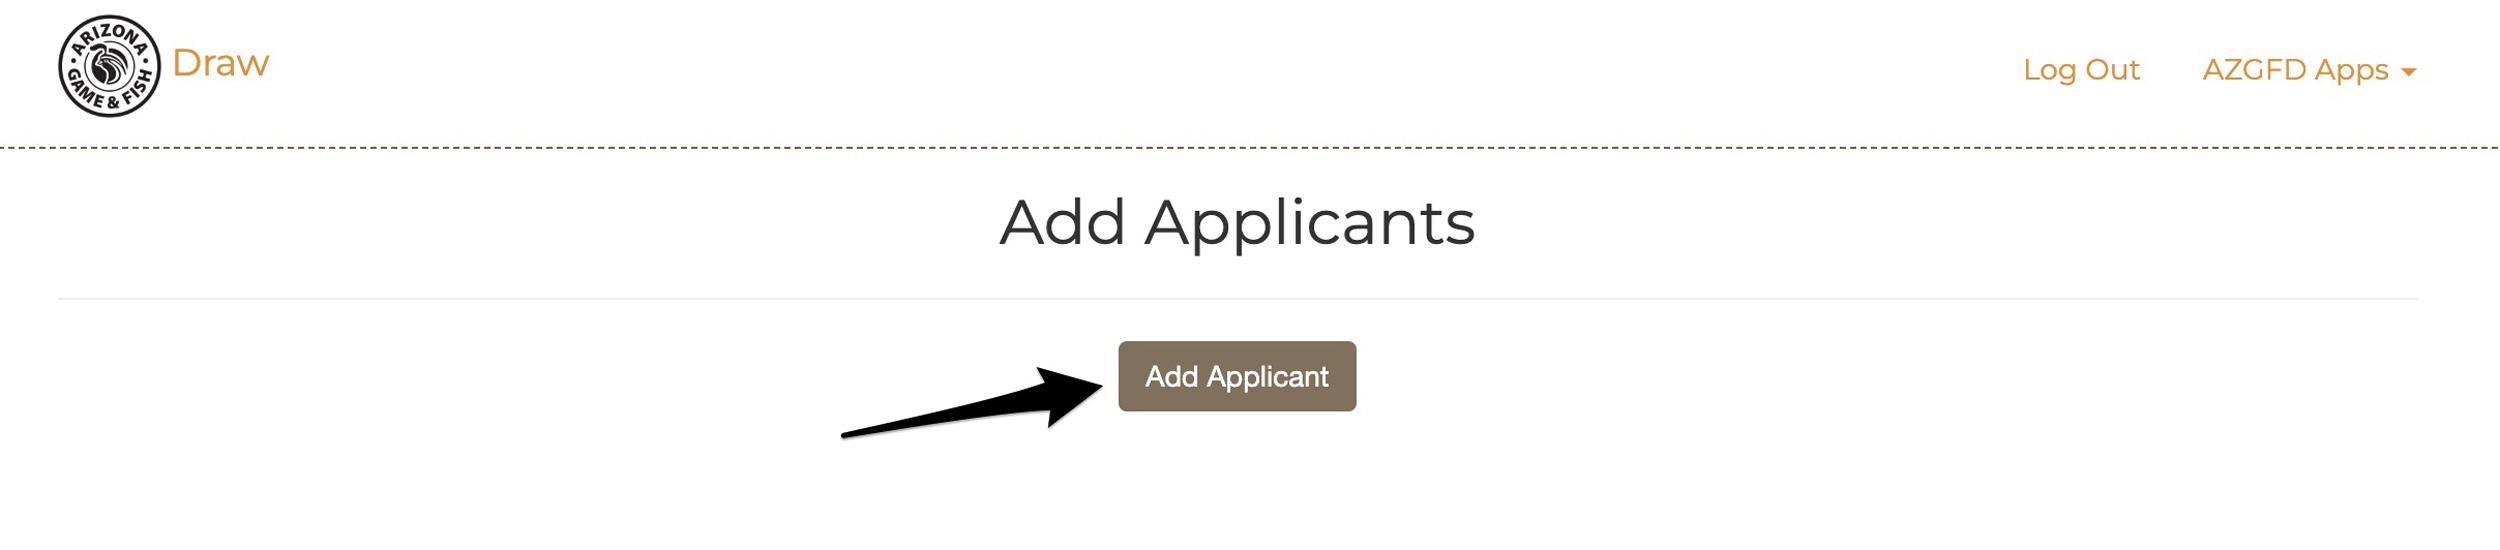 Add applicant section on Arizona licensing website